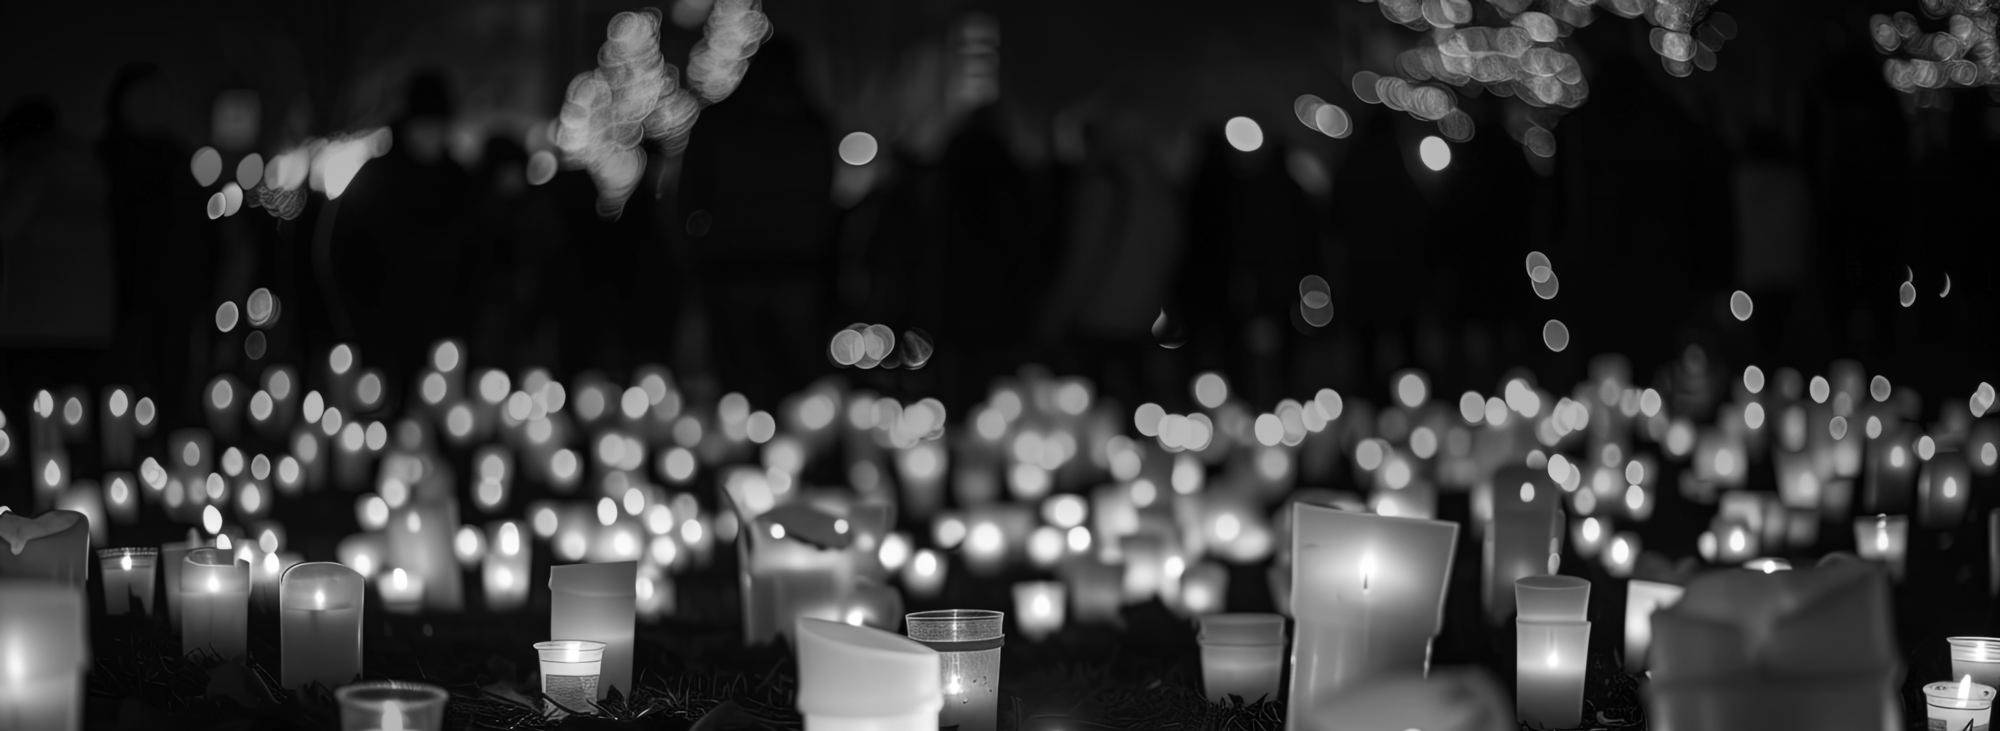 Tributes Archive - International Overdose Awareness Day